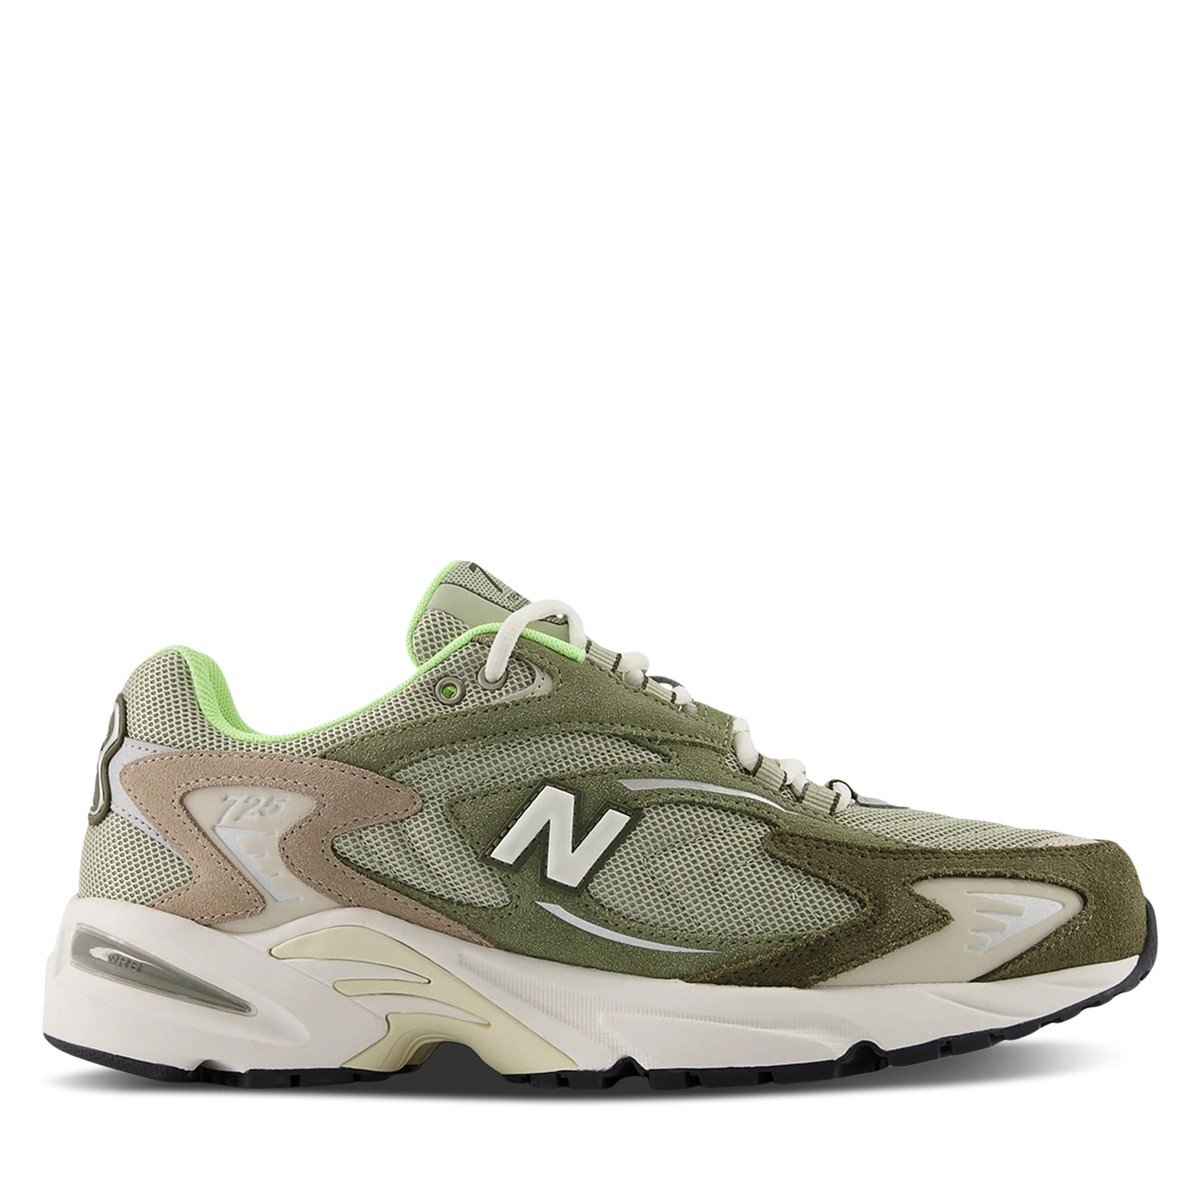 725 Sneakers in Olive